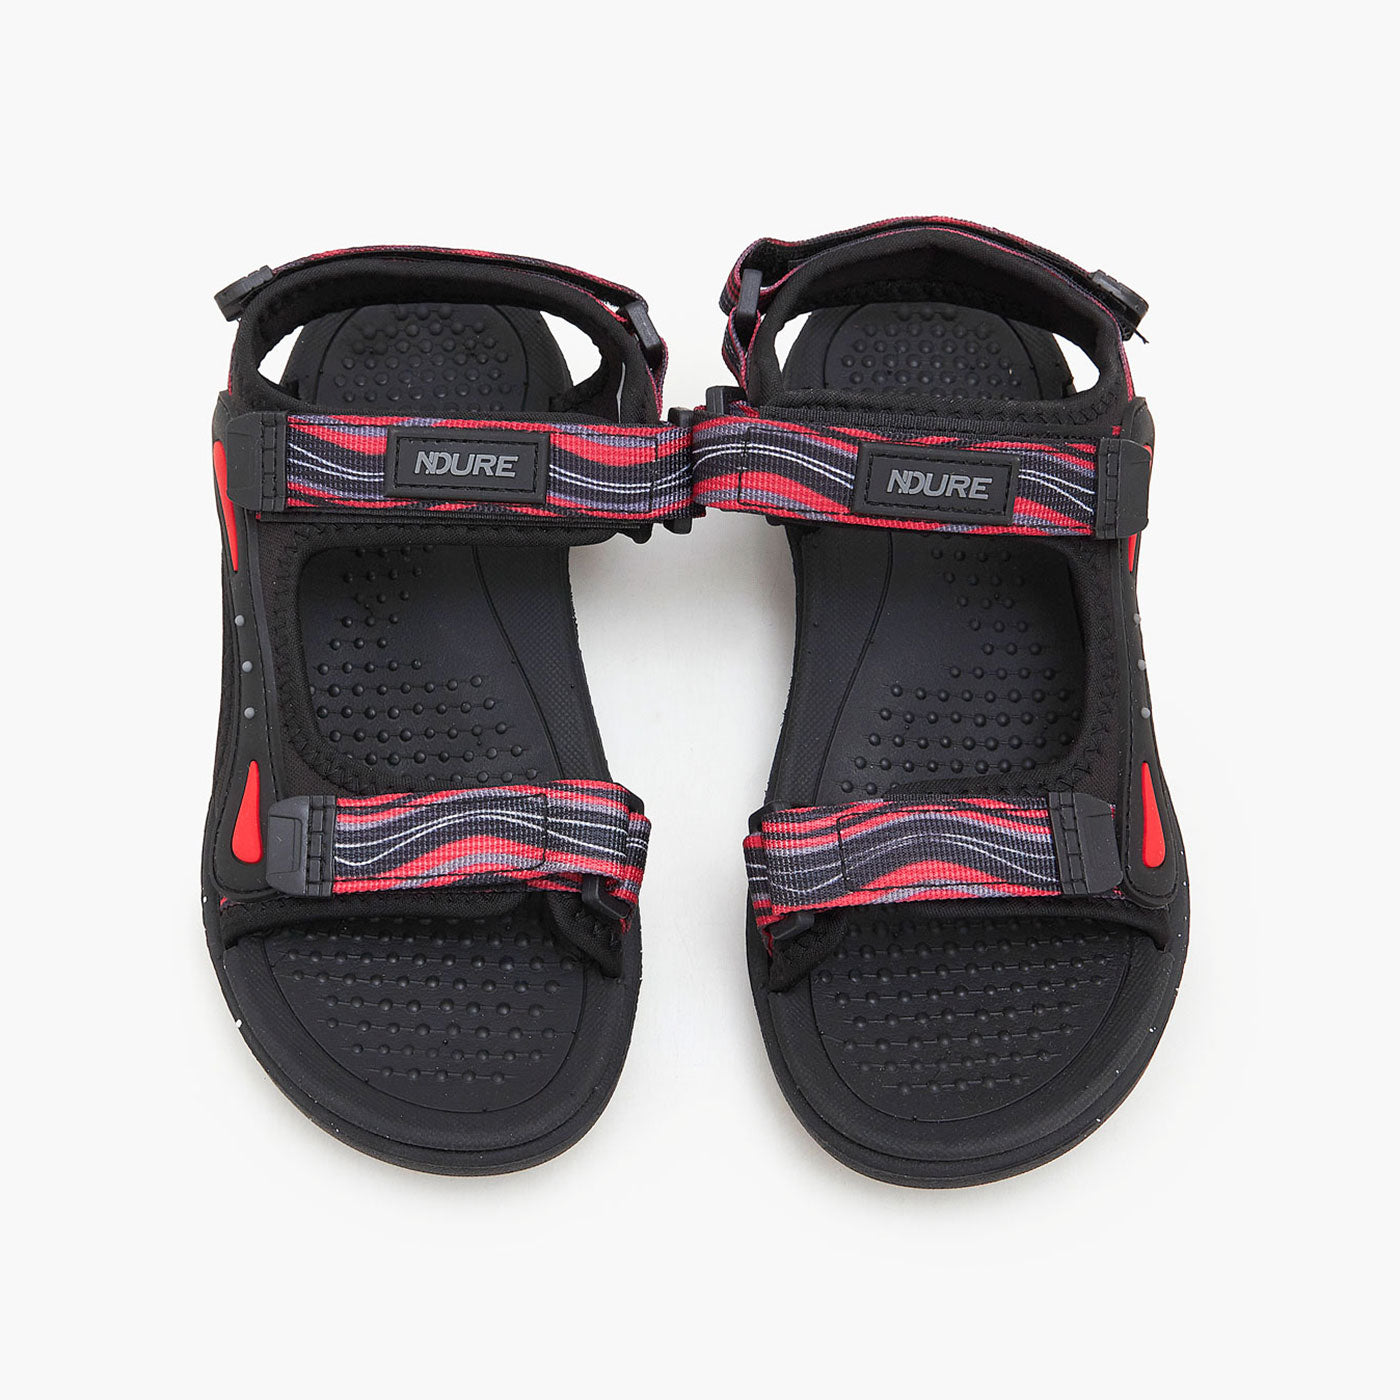 Boys Sandals with Rubber Patch